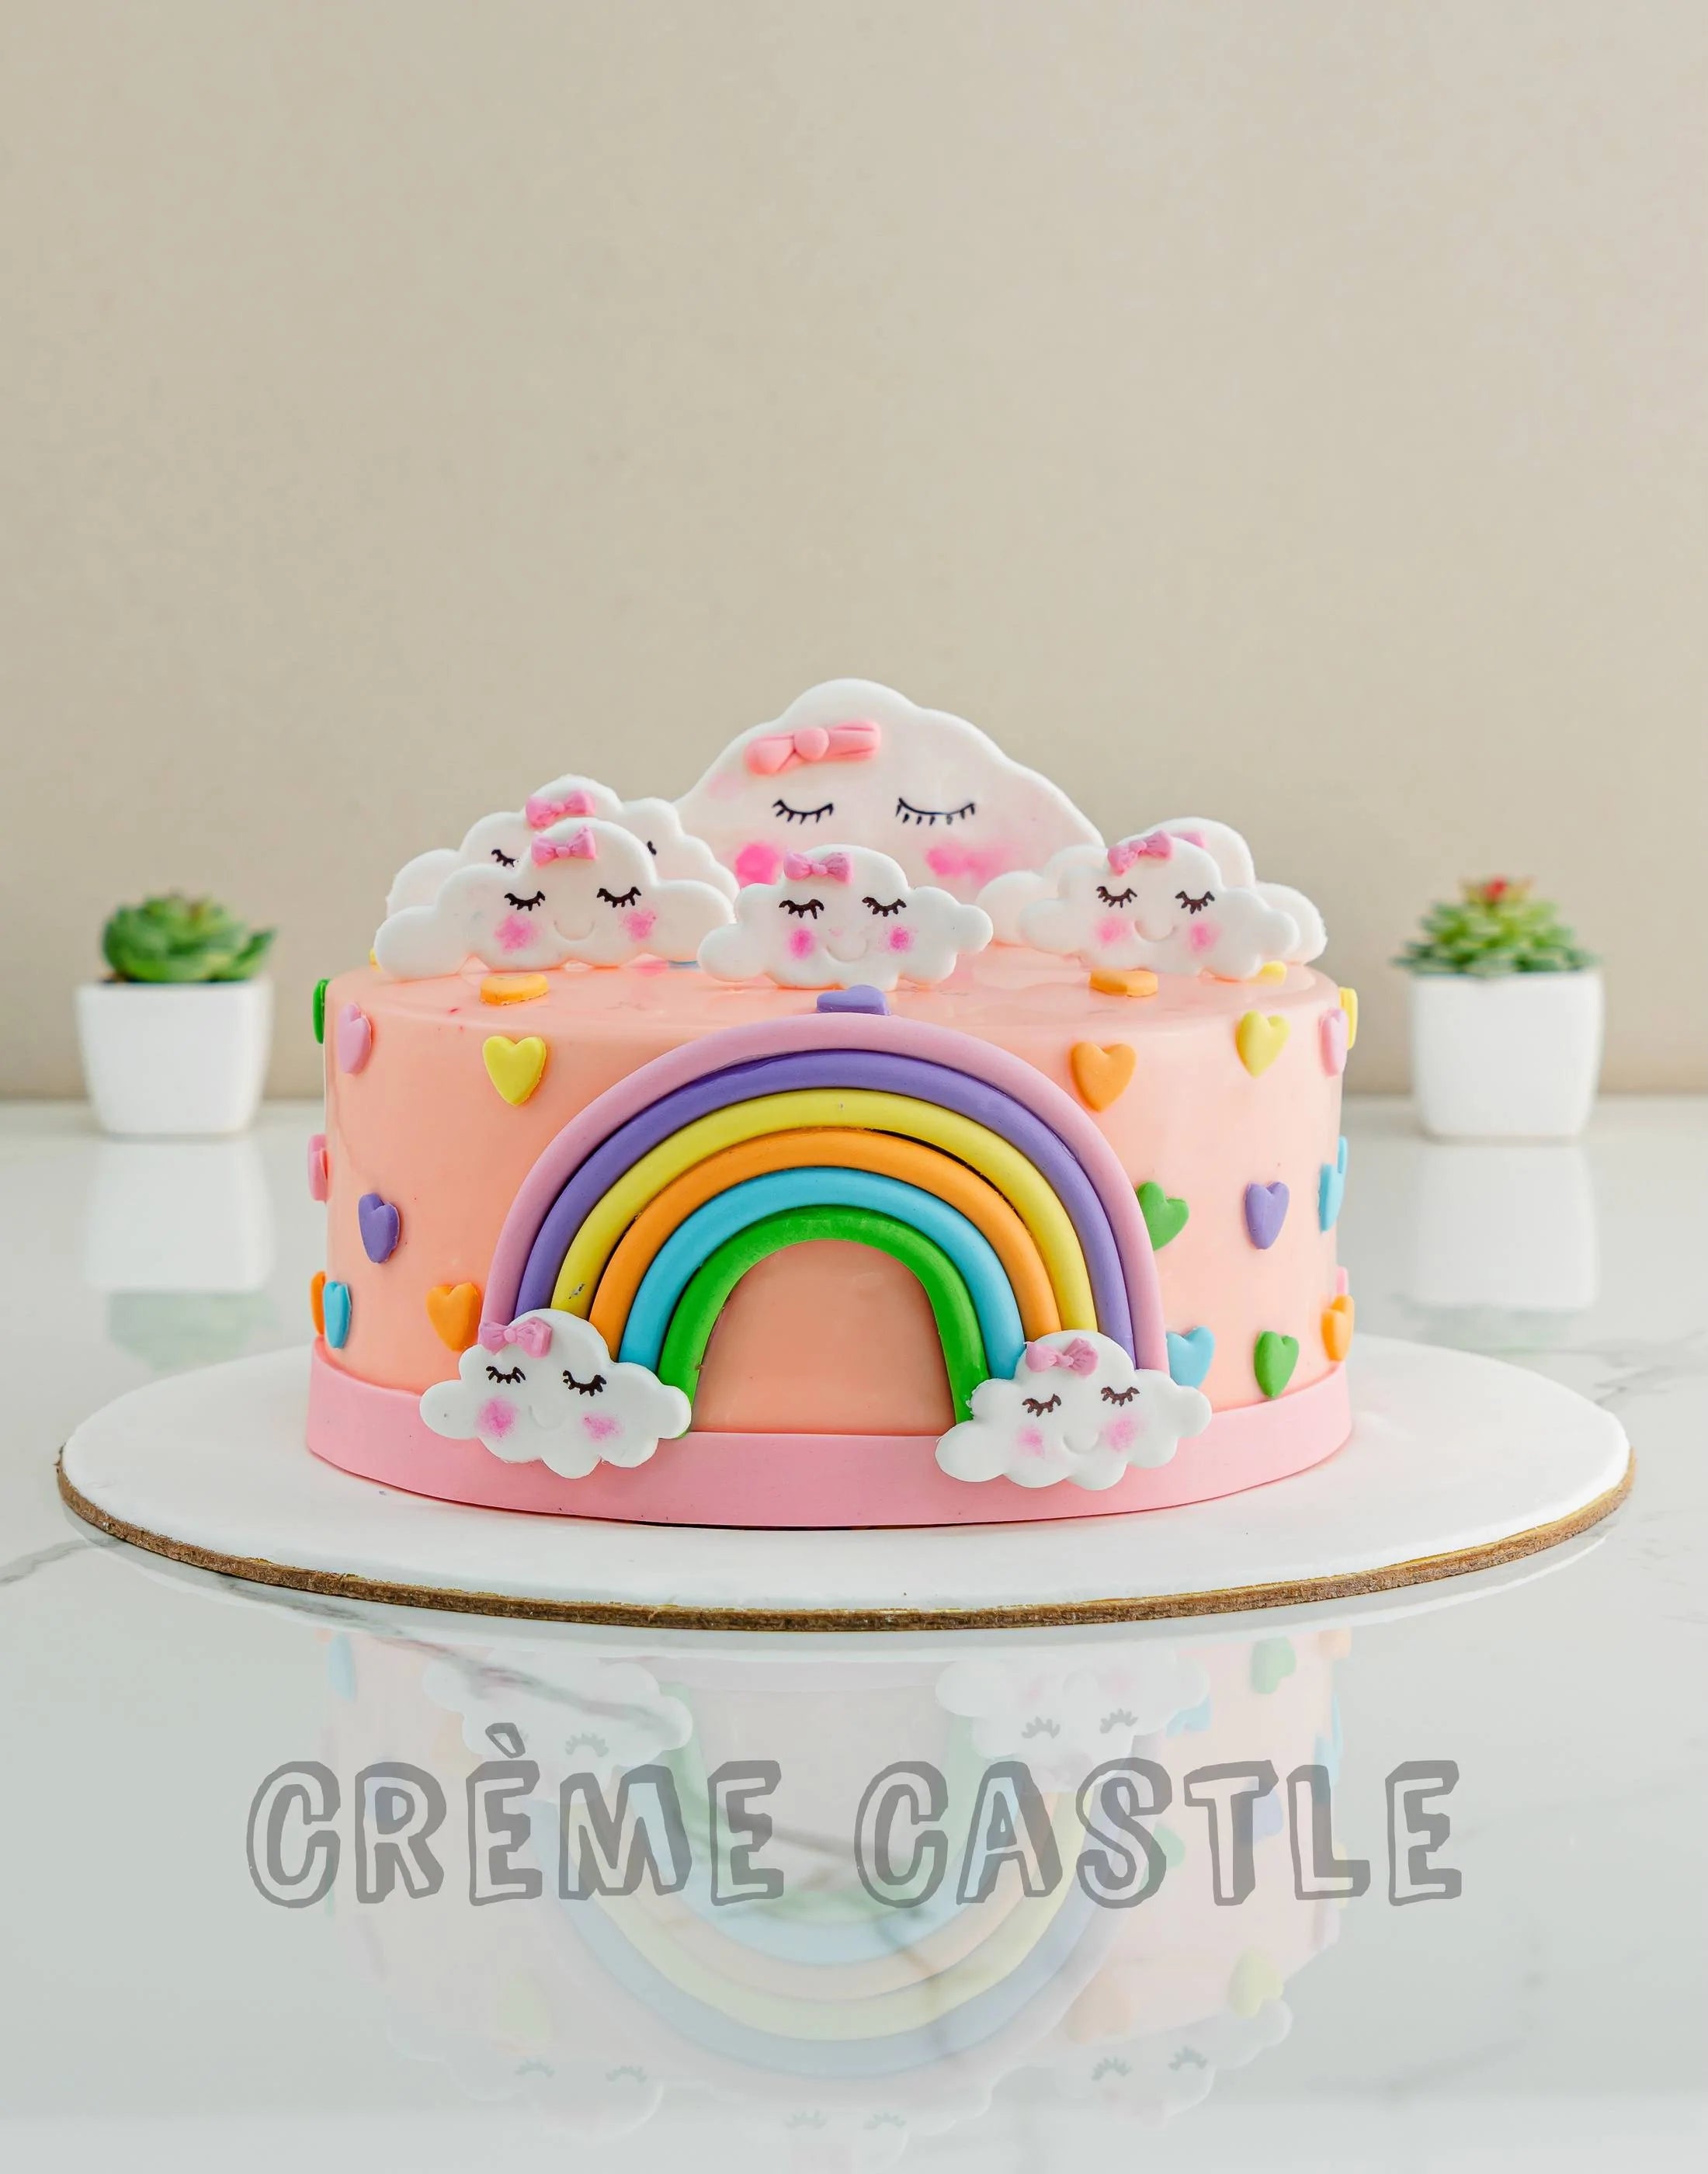 This Cute Rainbow Cake Might Just Be the Star of Your Christmas Celebration